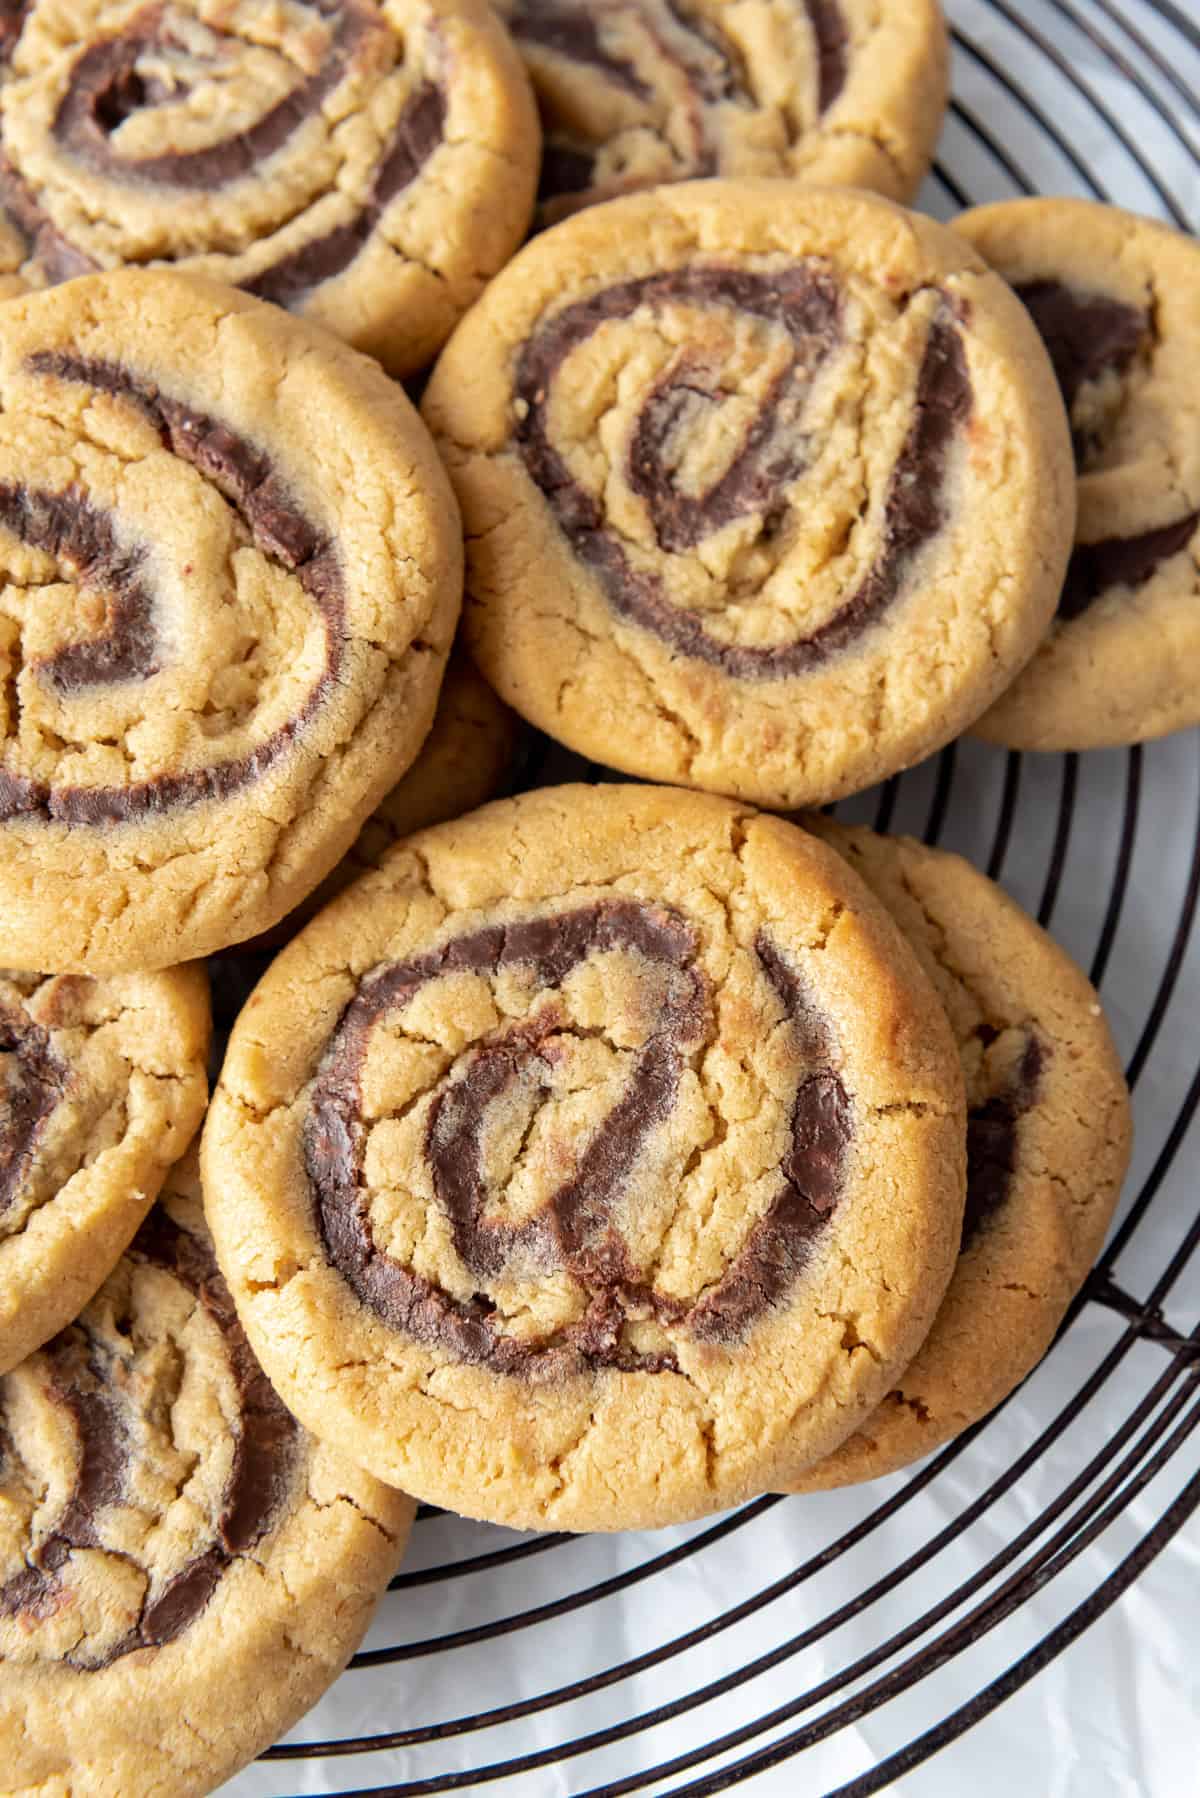 Slice-and-bake peanut butter cookies with a soft chocolate swirl.